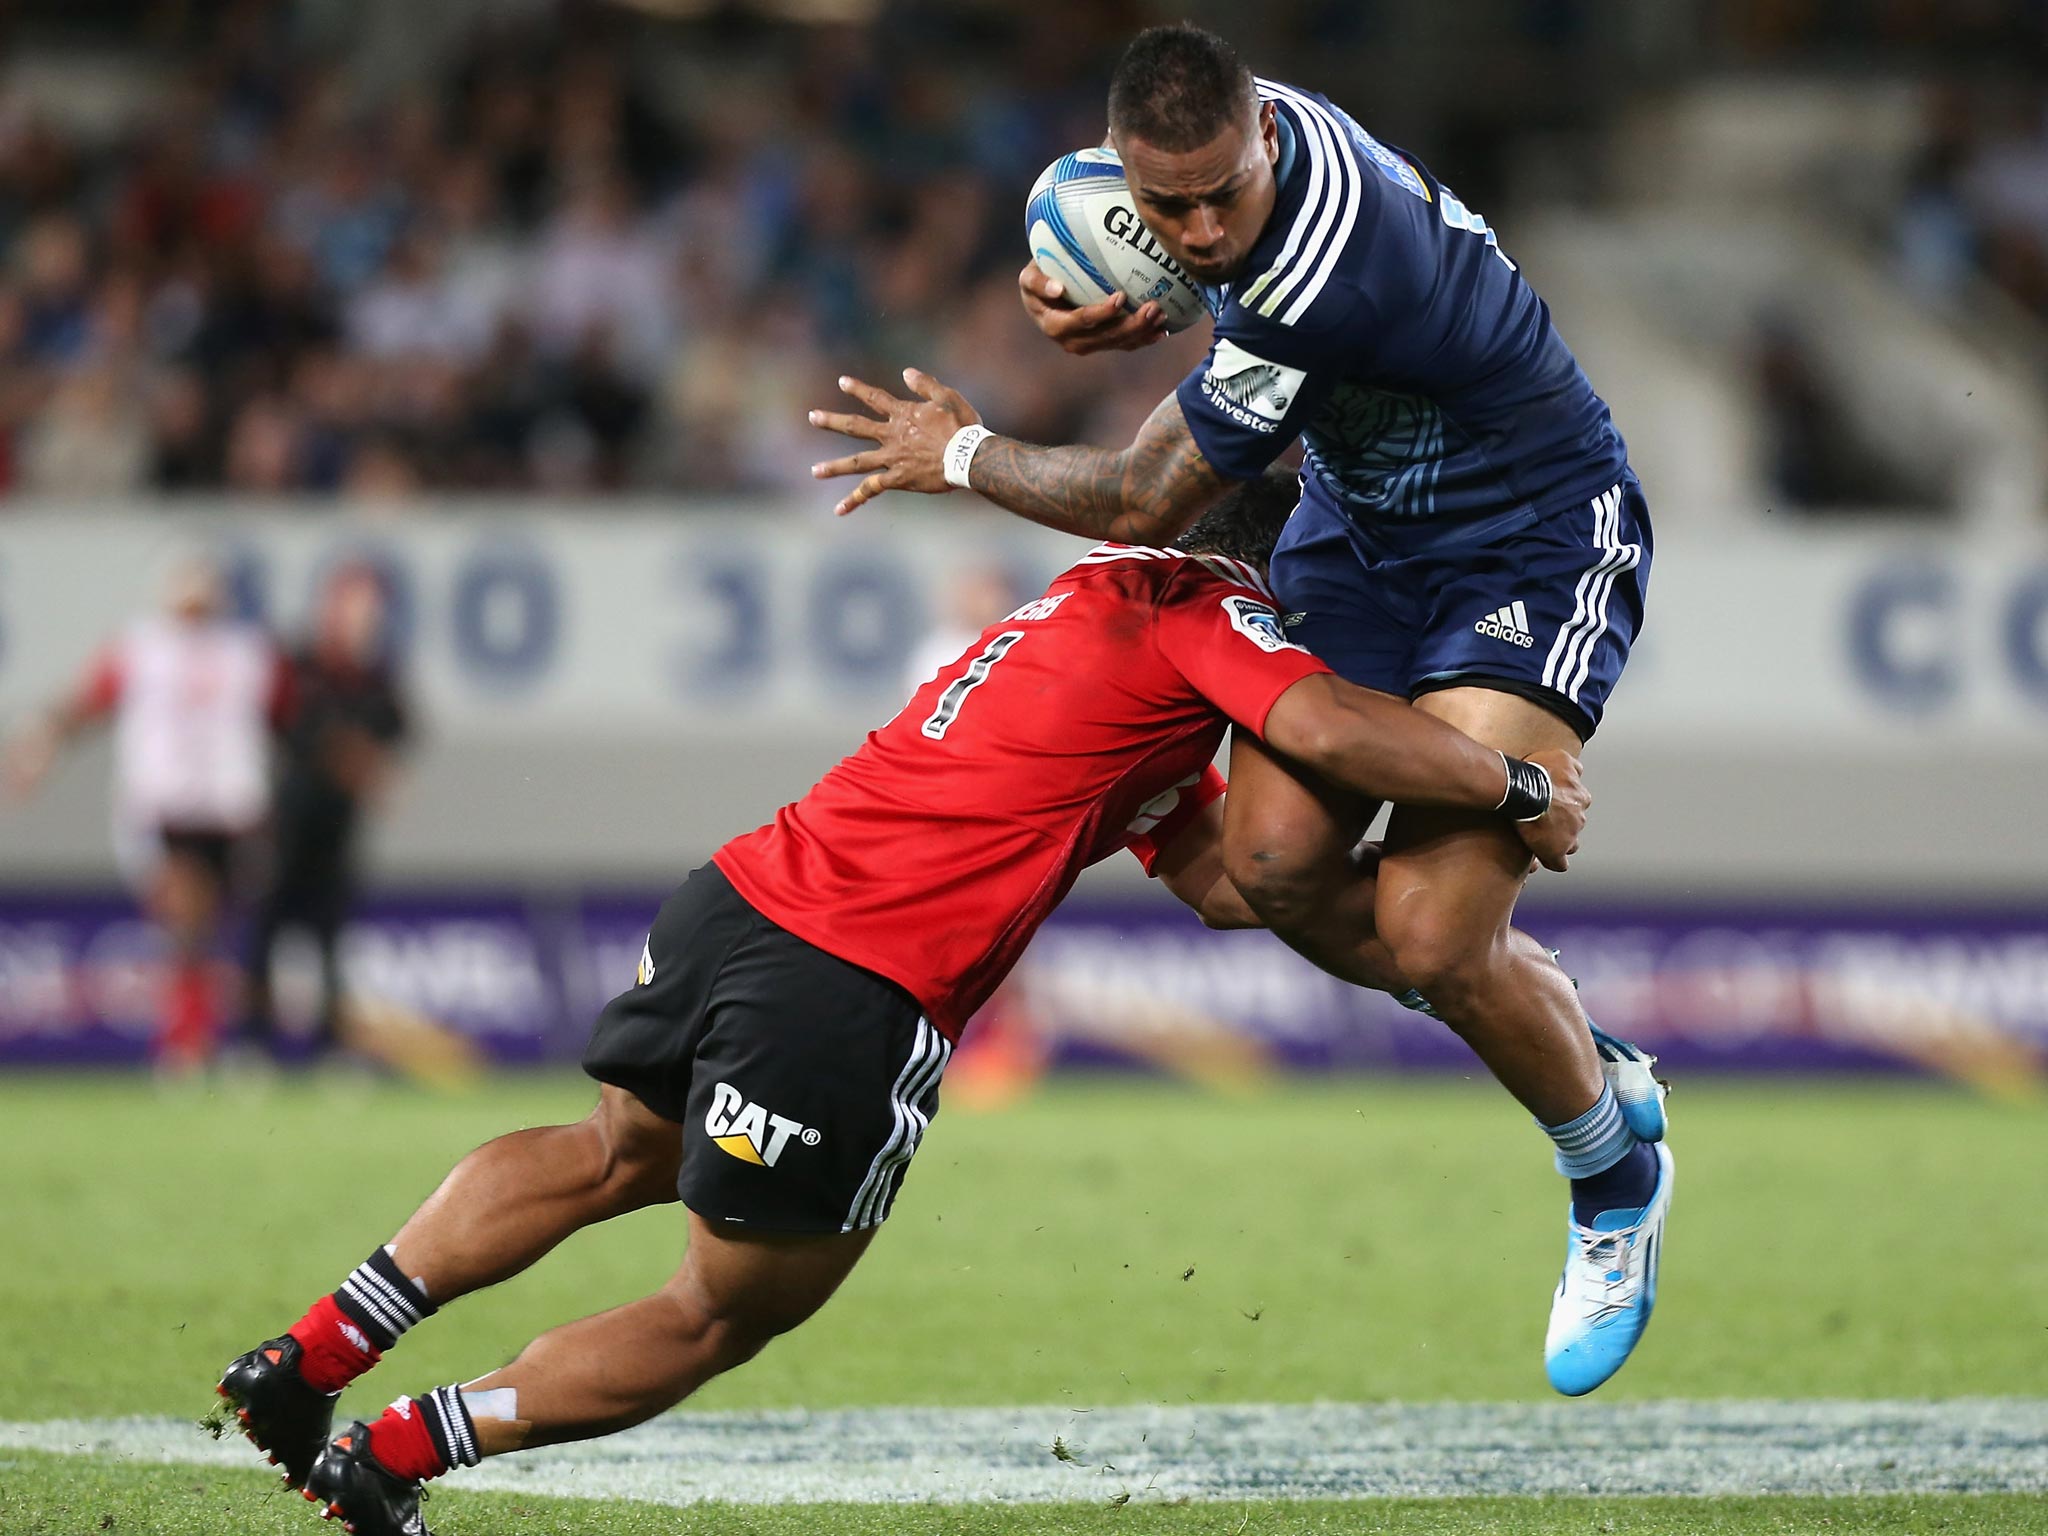 Frank Halai of the Auckland Blues got on the scoresheet in the victory over the Crusaders